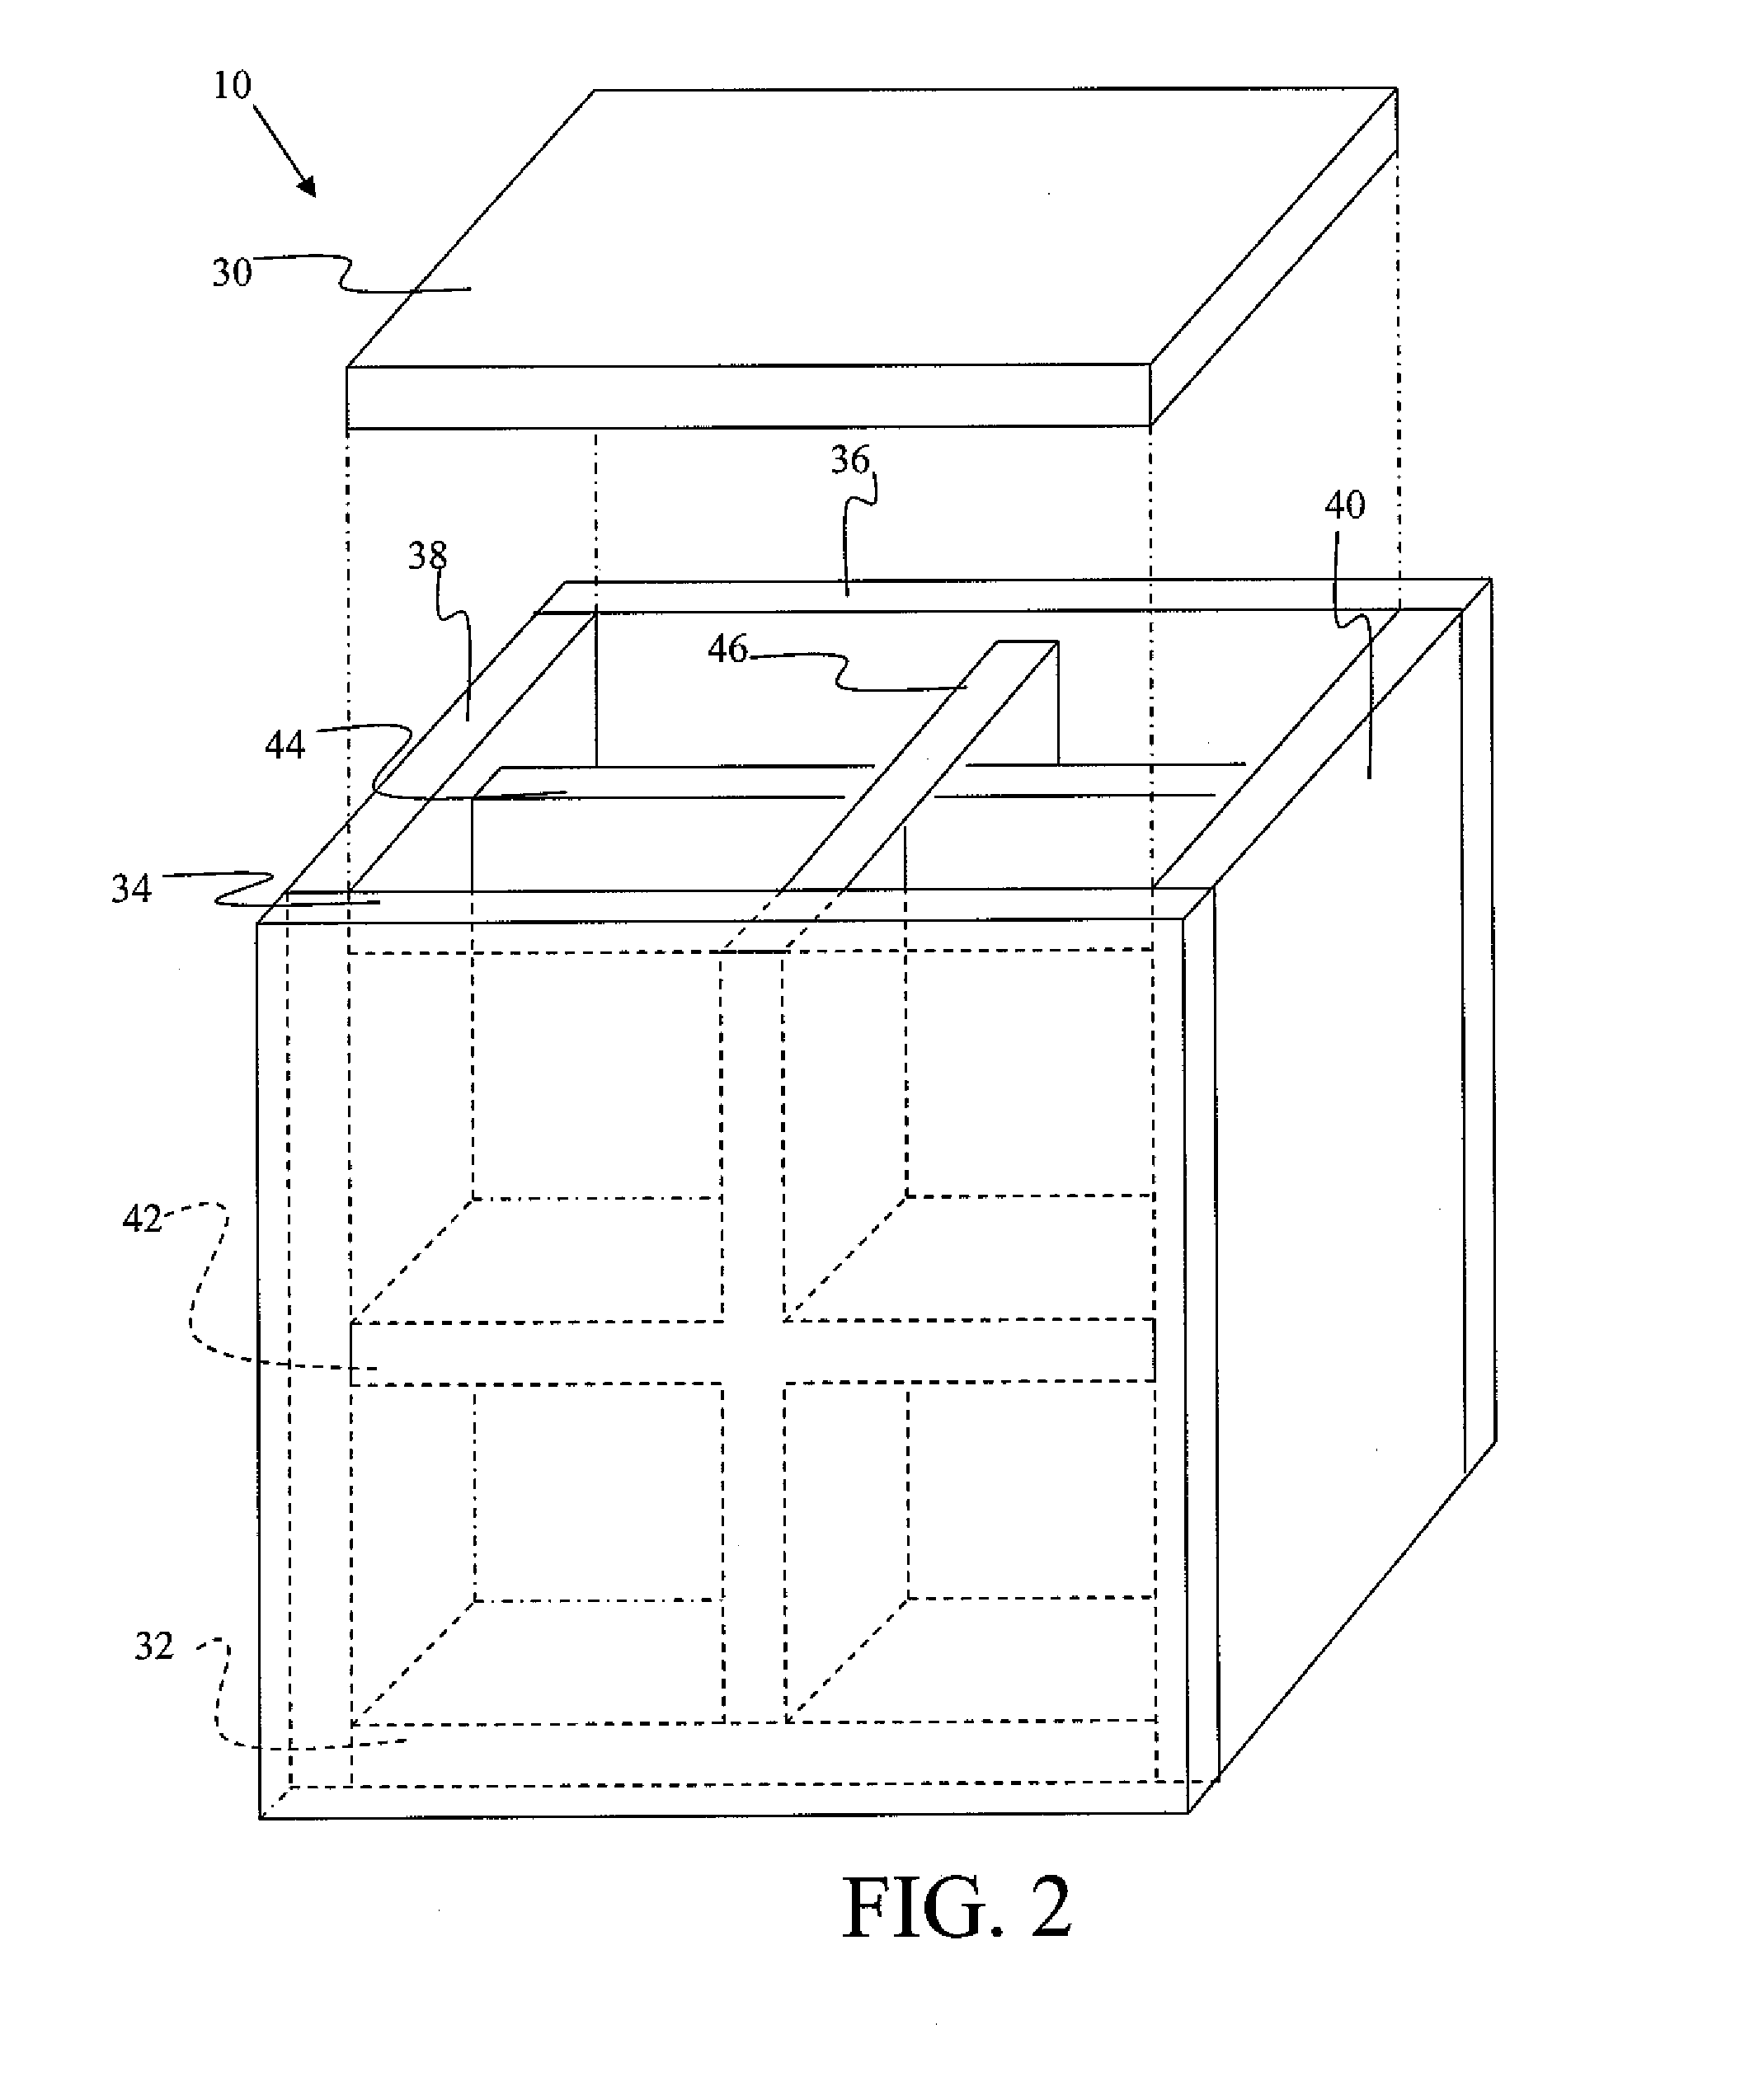 Radiation detection device, system and related methods